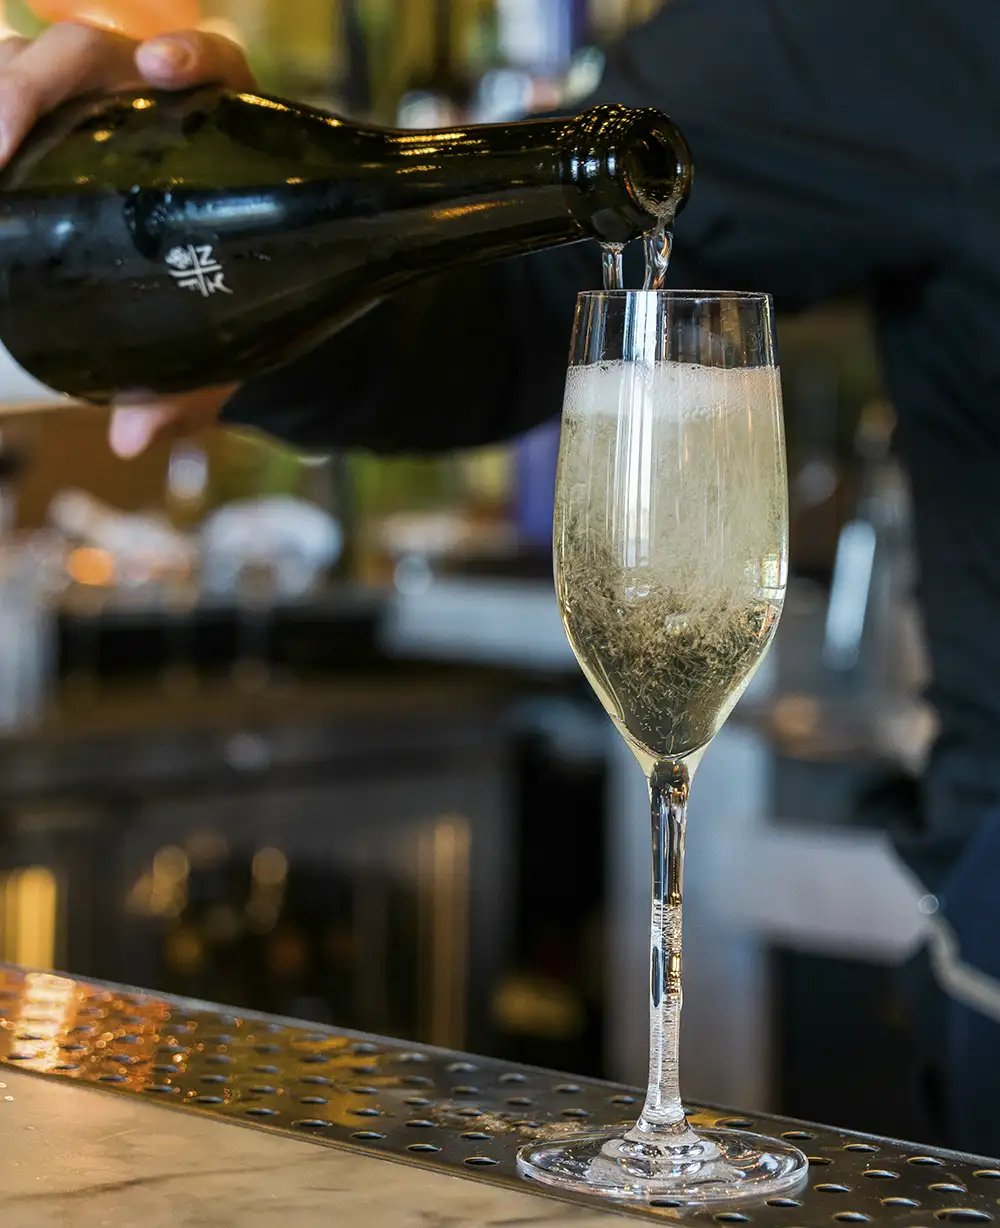 A bartender pouring a glass of sparkline wine or champagne at a bar